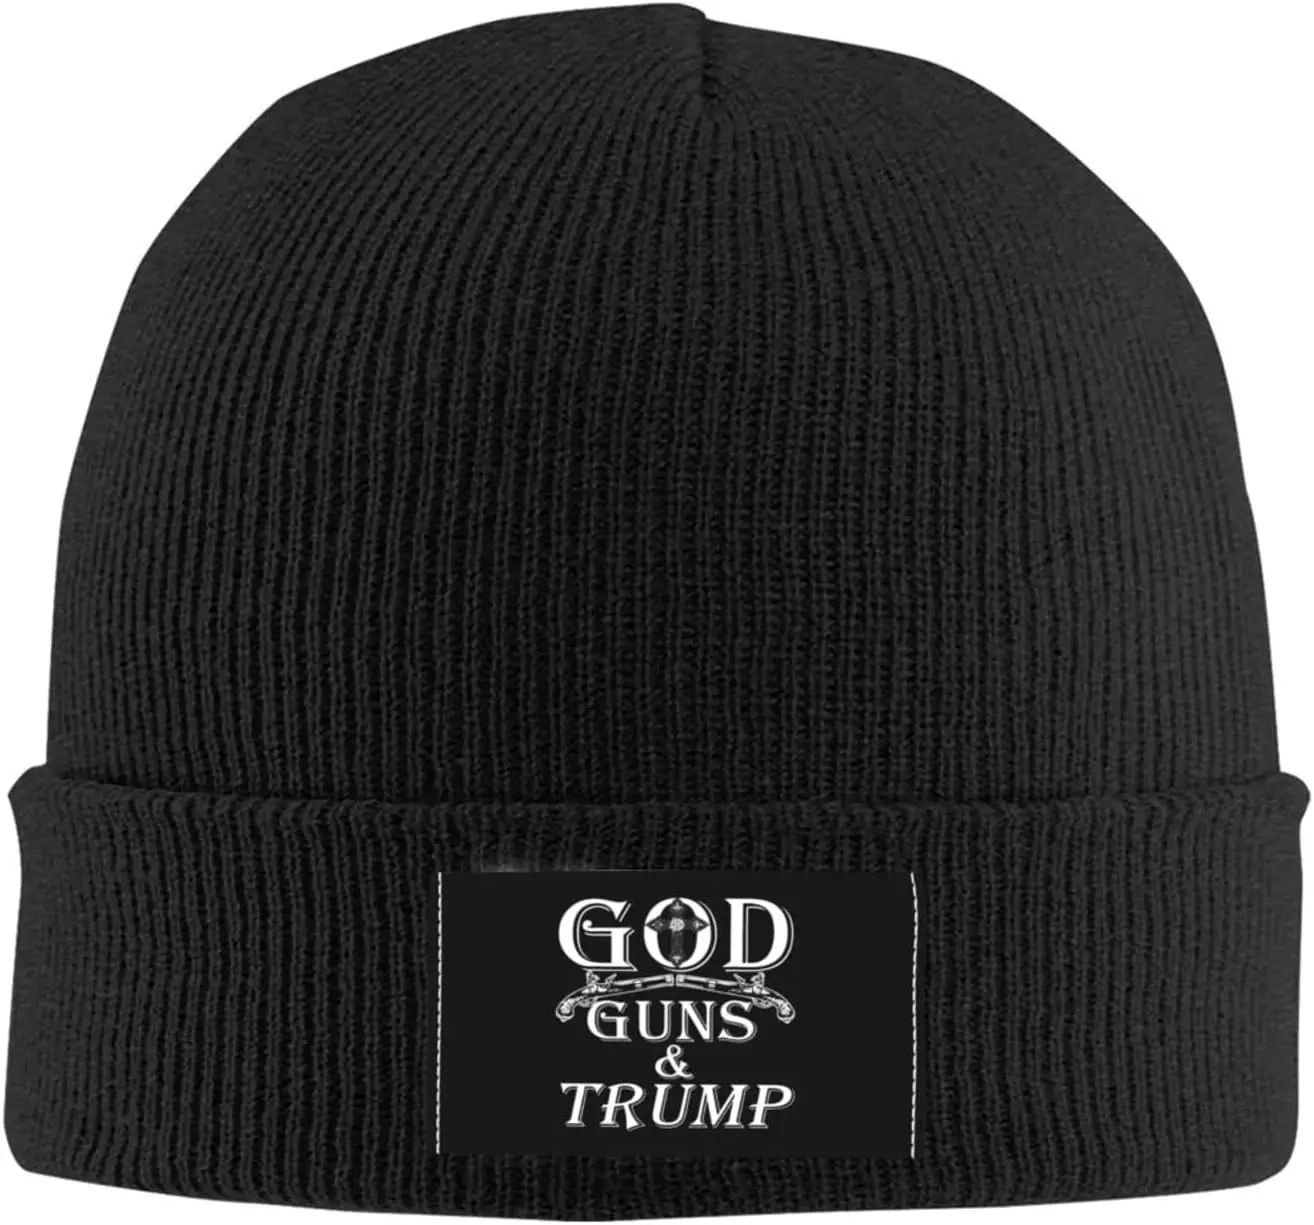 God guns and trump unisex four seasons knitted hat winter warm hats hats for men women thumb200